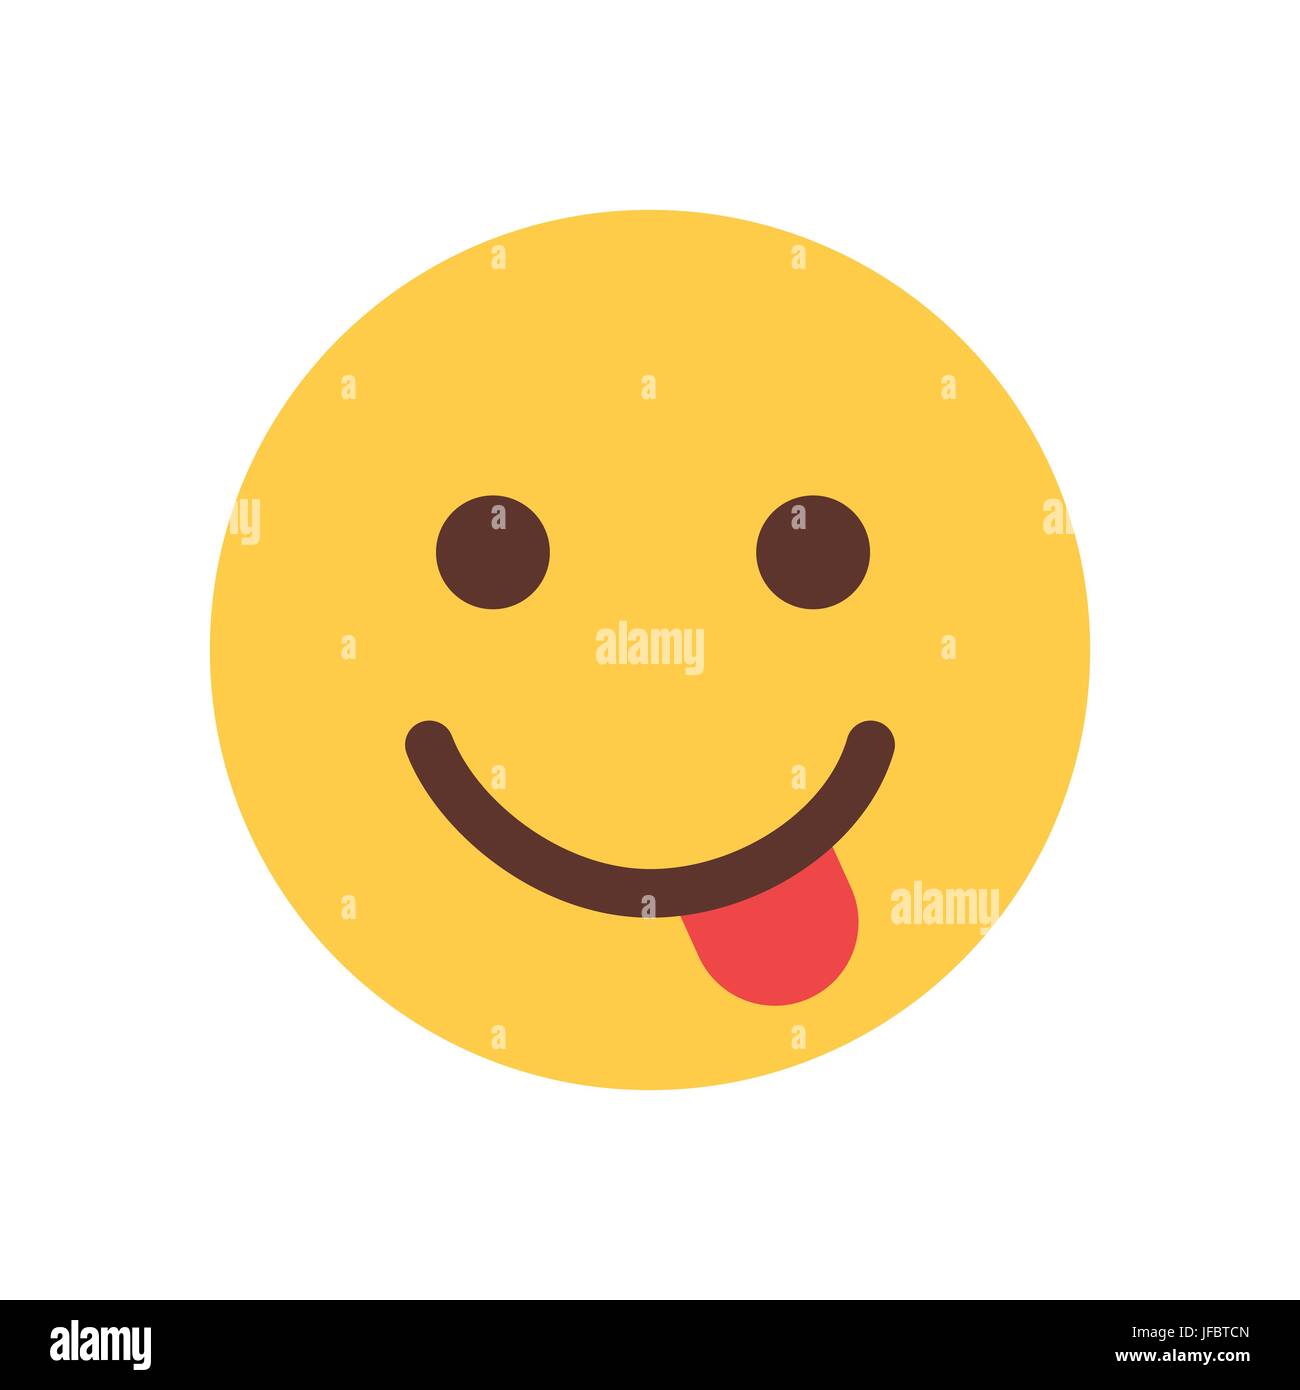 Yellow Smiling Cartoon Face Show Tongue Emoji People Emotion Icon Stock Vector